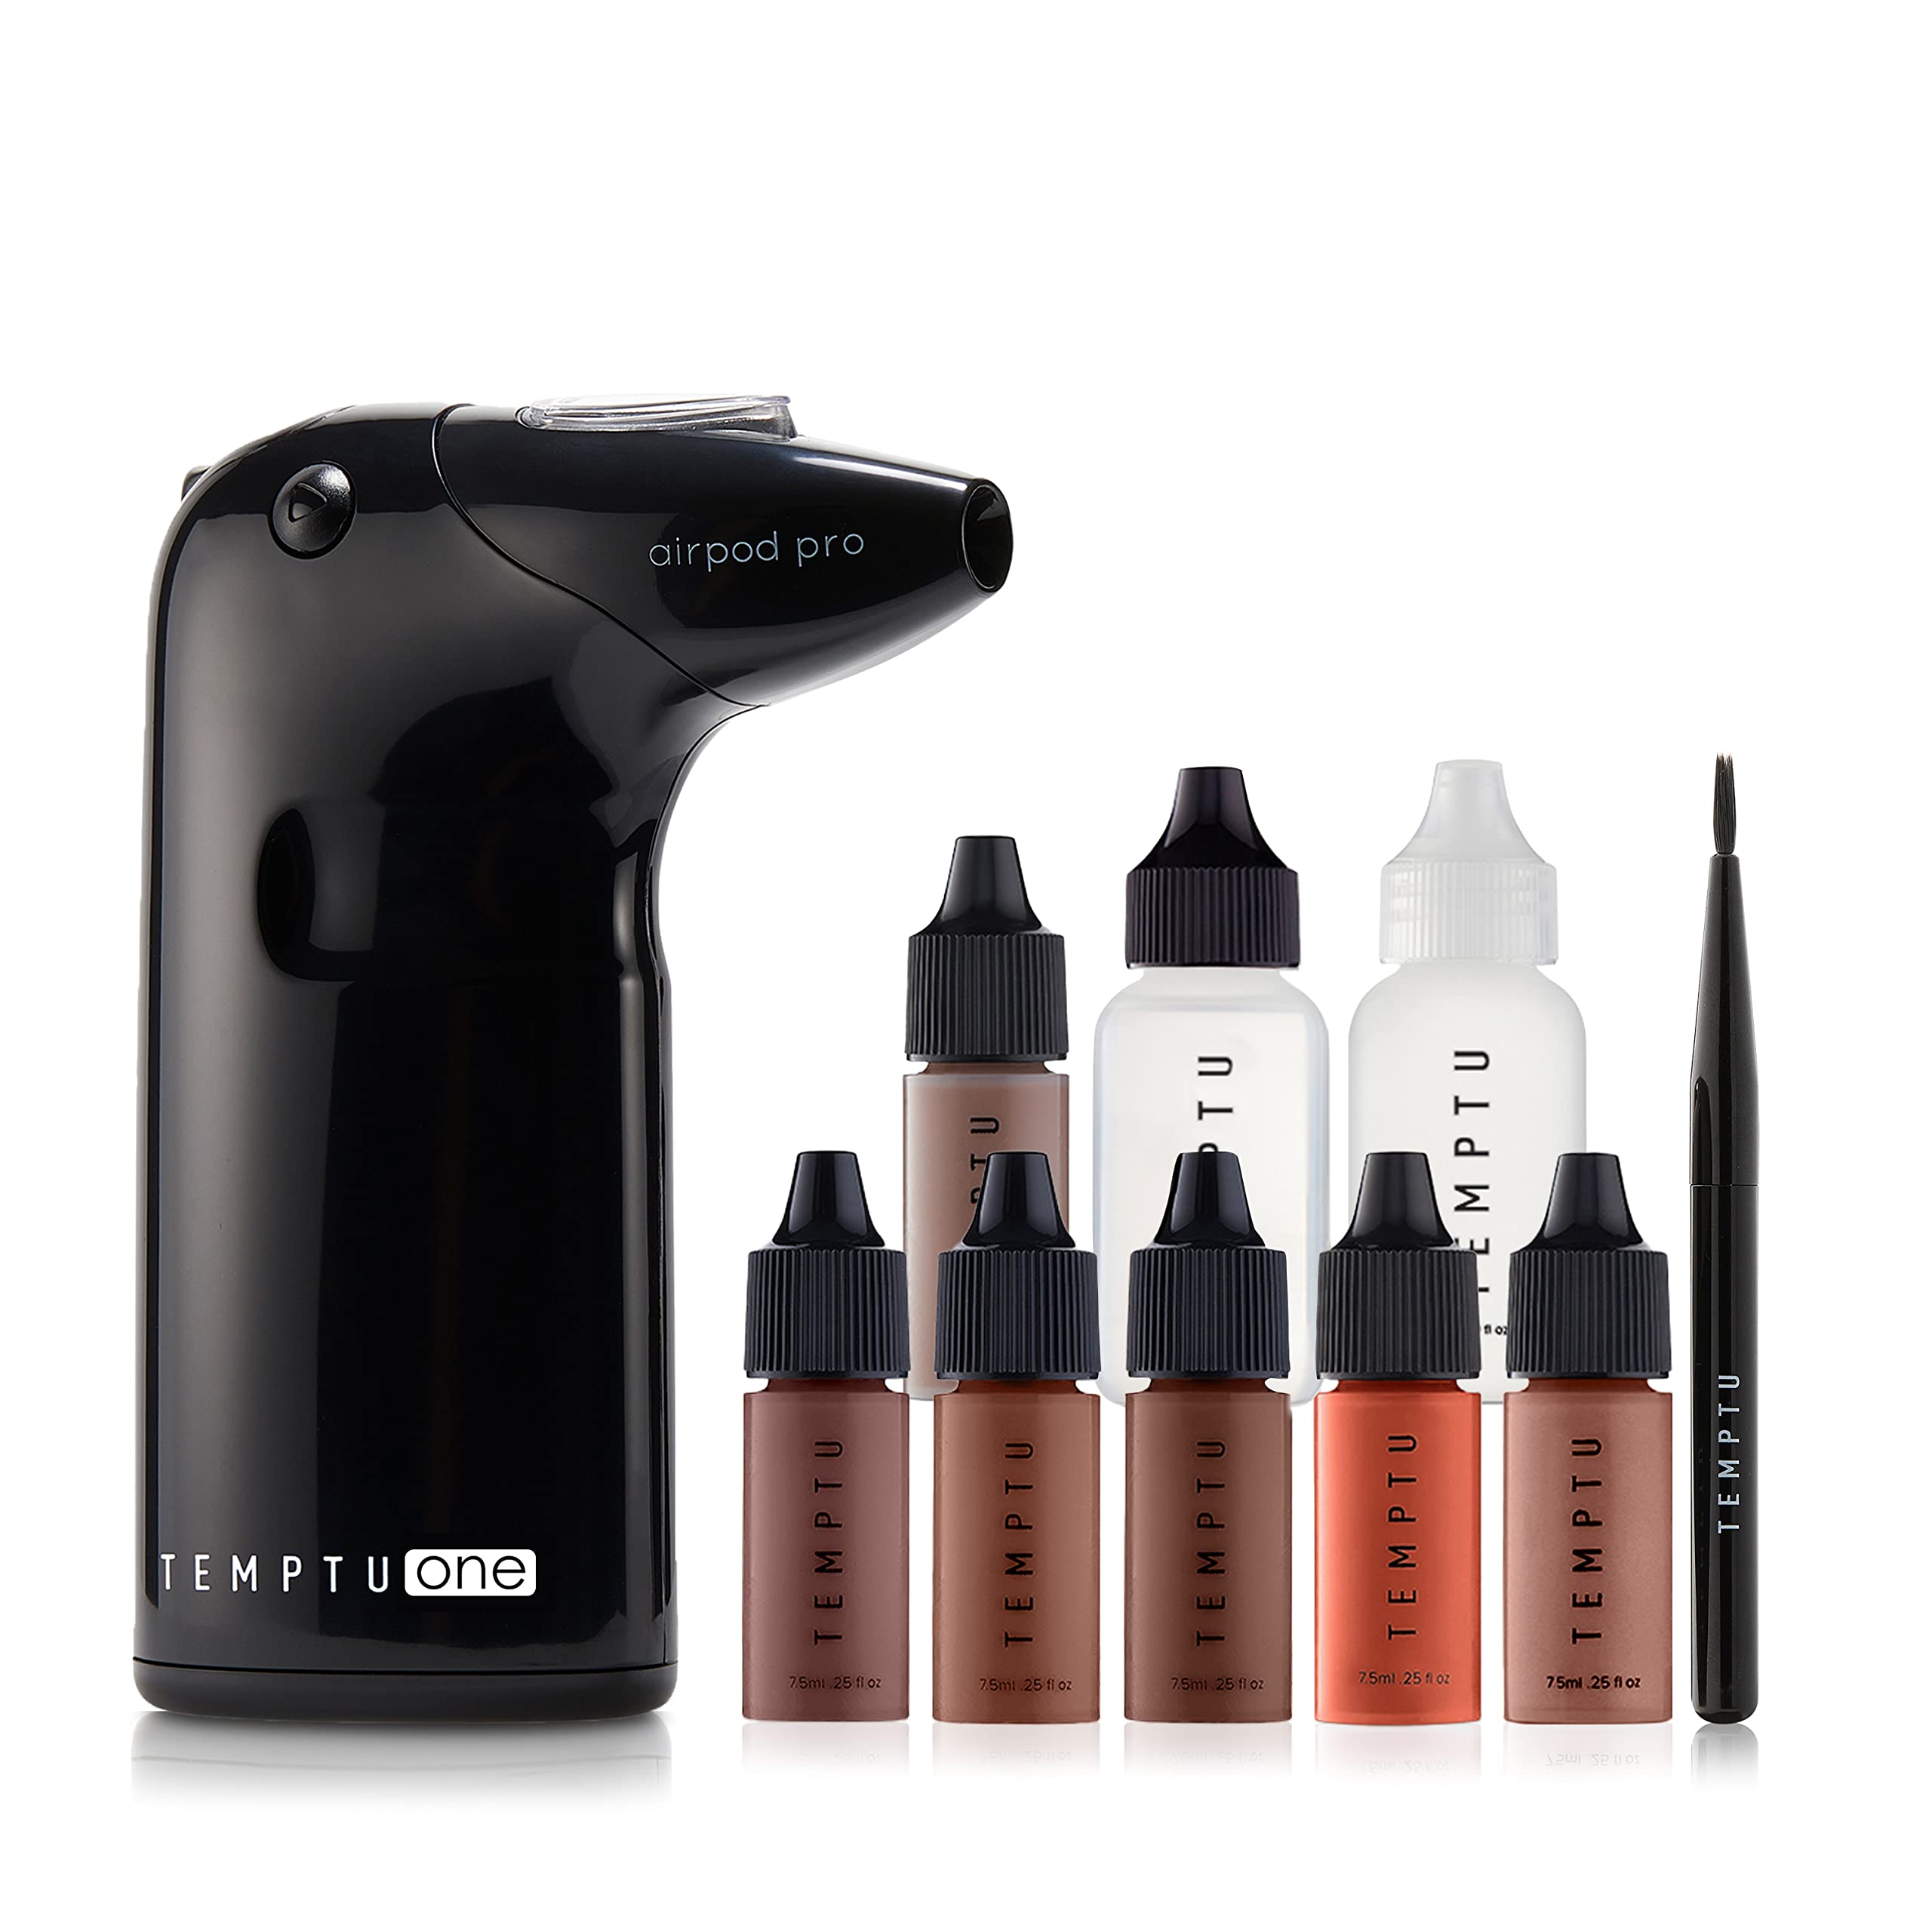 TEMPTU One Airbrush Make-up Kit for Complexion Perfection with Cordless Compressor: 11-Piece Set, Portable Air Brush Machine, 3 Shades of Foundation, Blush, Bronzer, Instant Concealer – 6 Shades